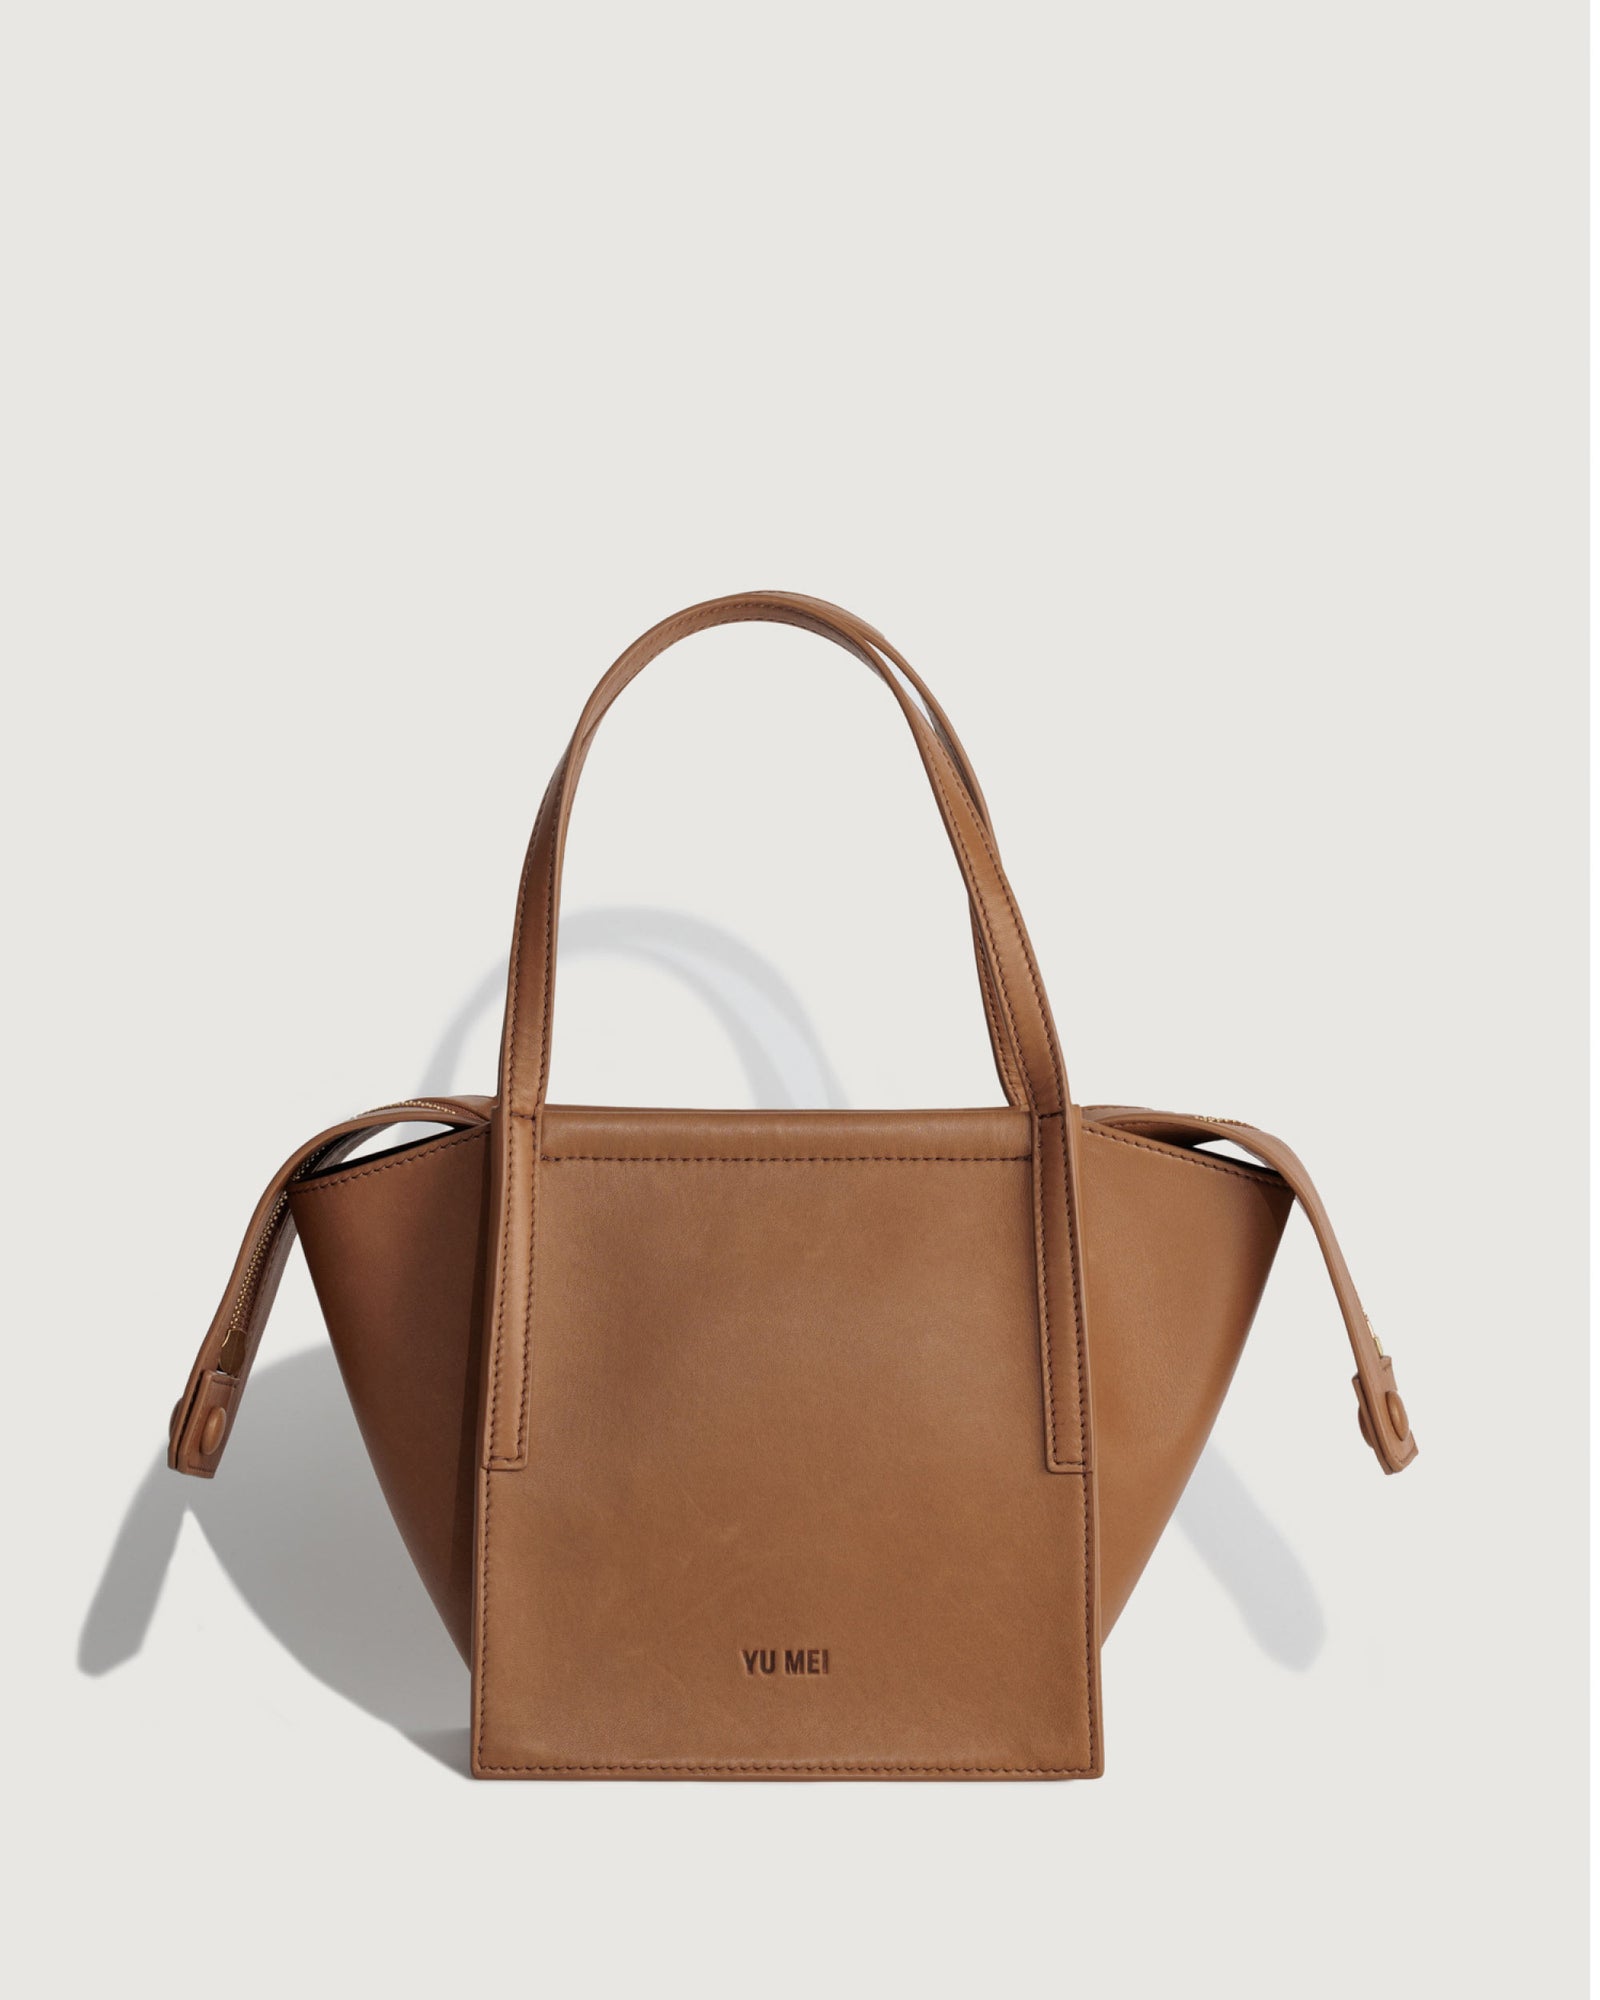 Bag front profile with strap detached